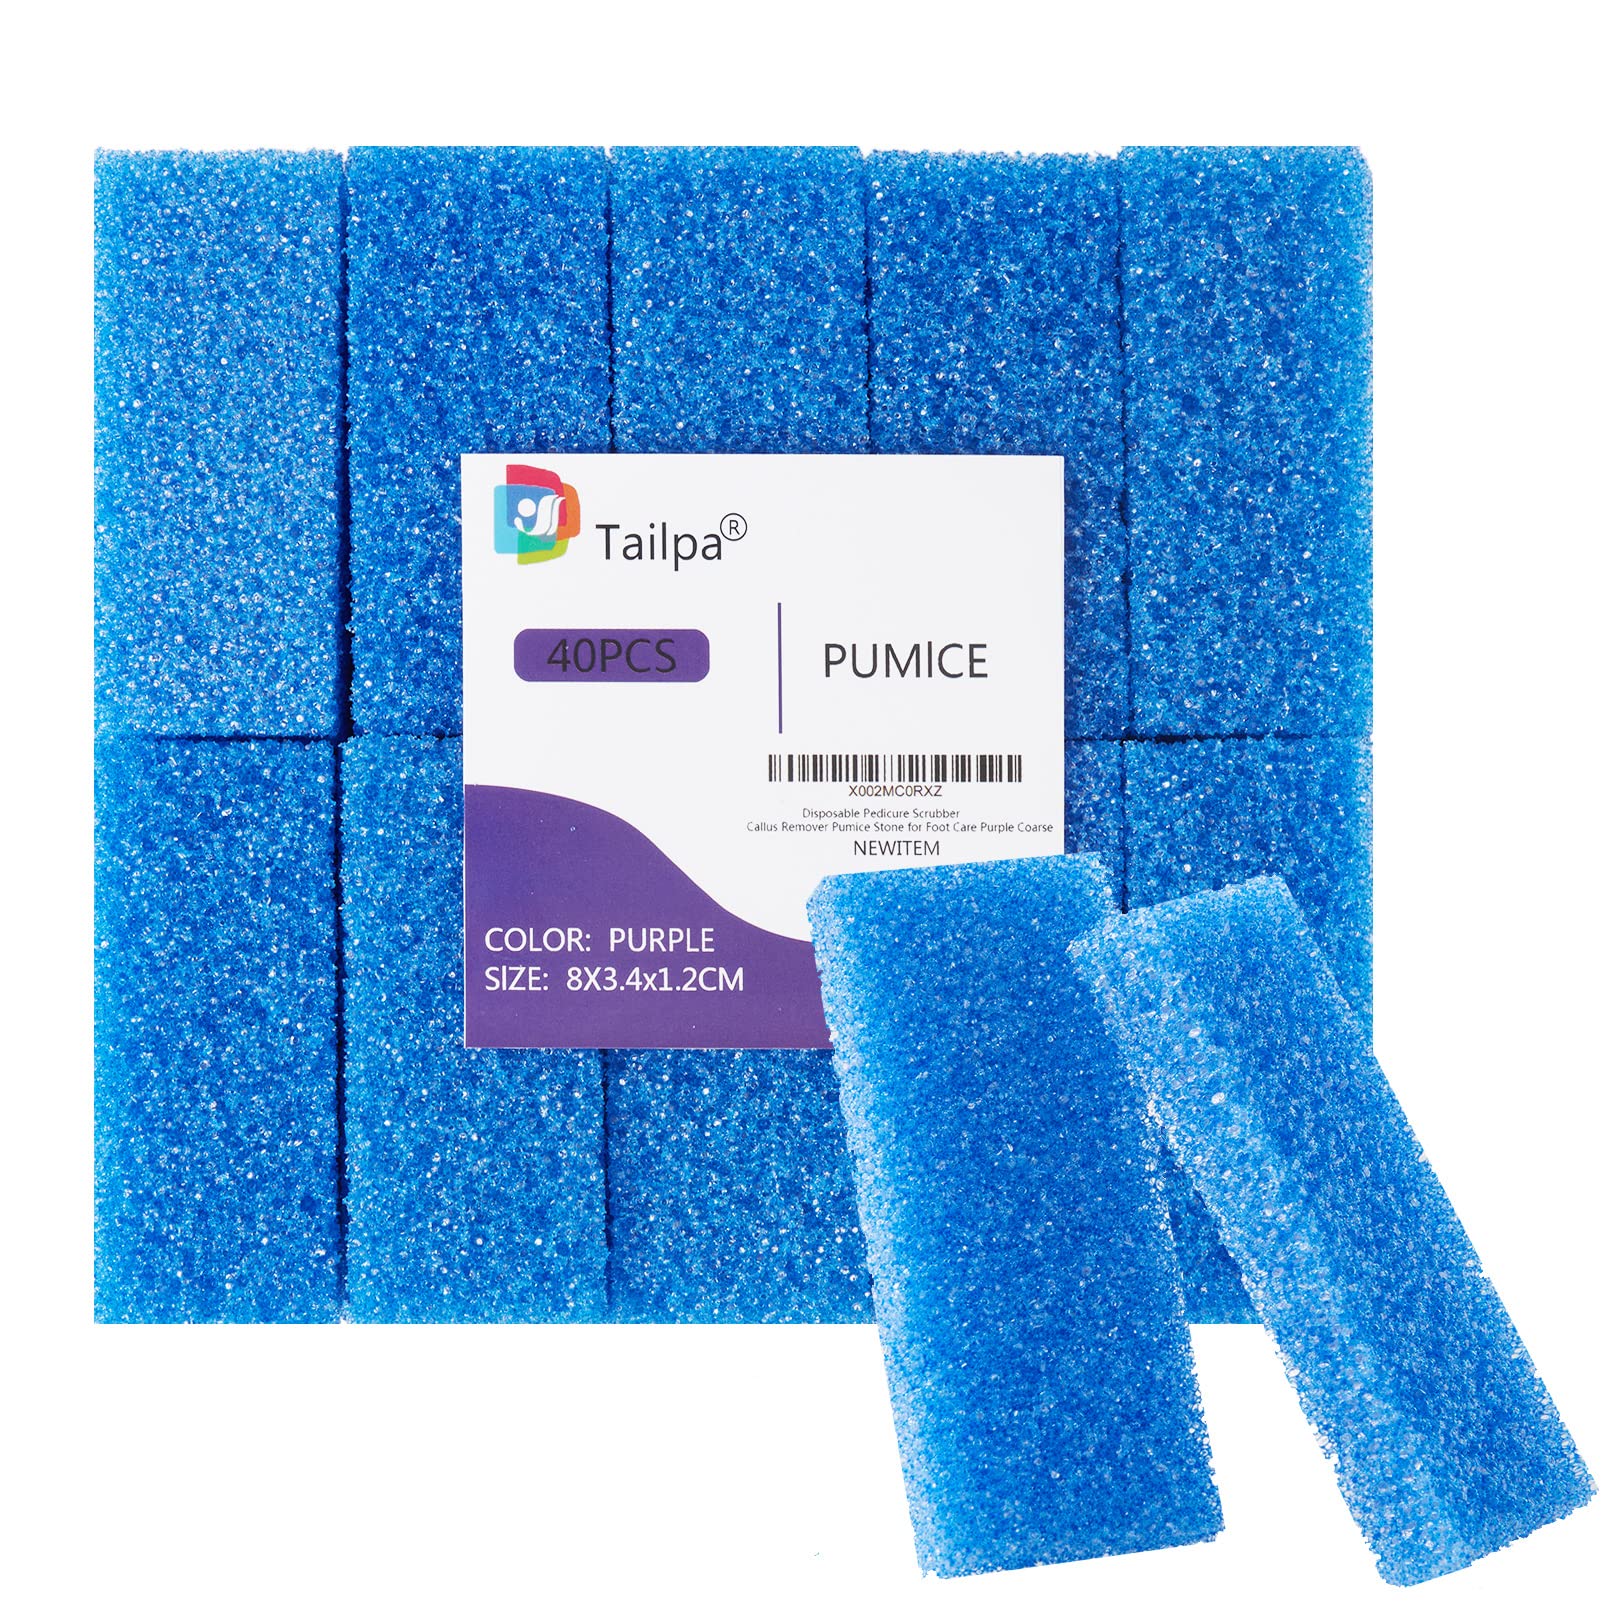 140 Pcs Disposable Foot Pumice Stone Foot Scrubber Sponge Pads for